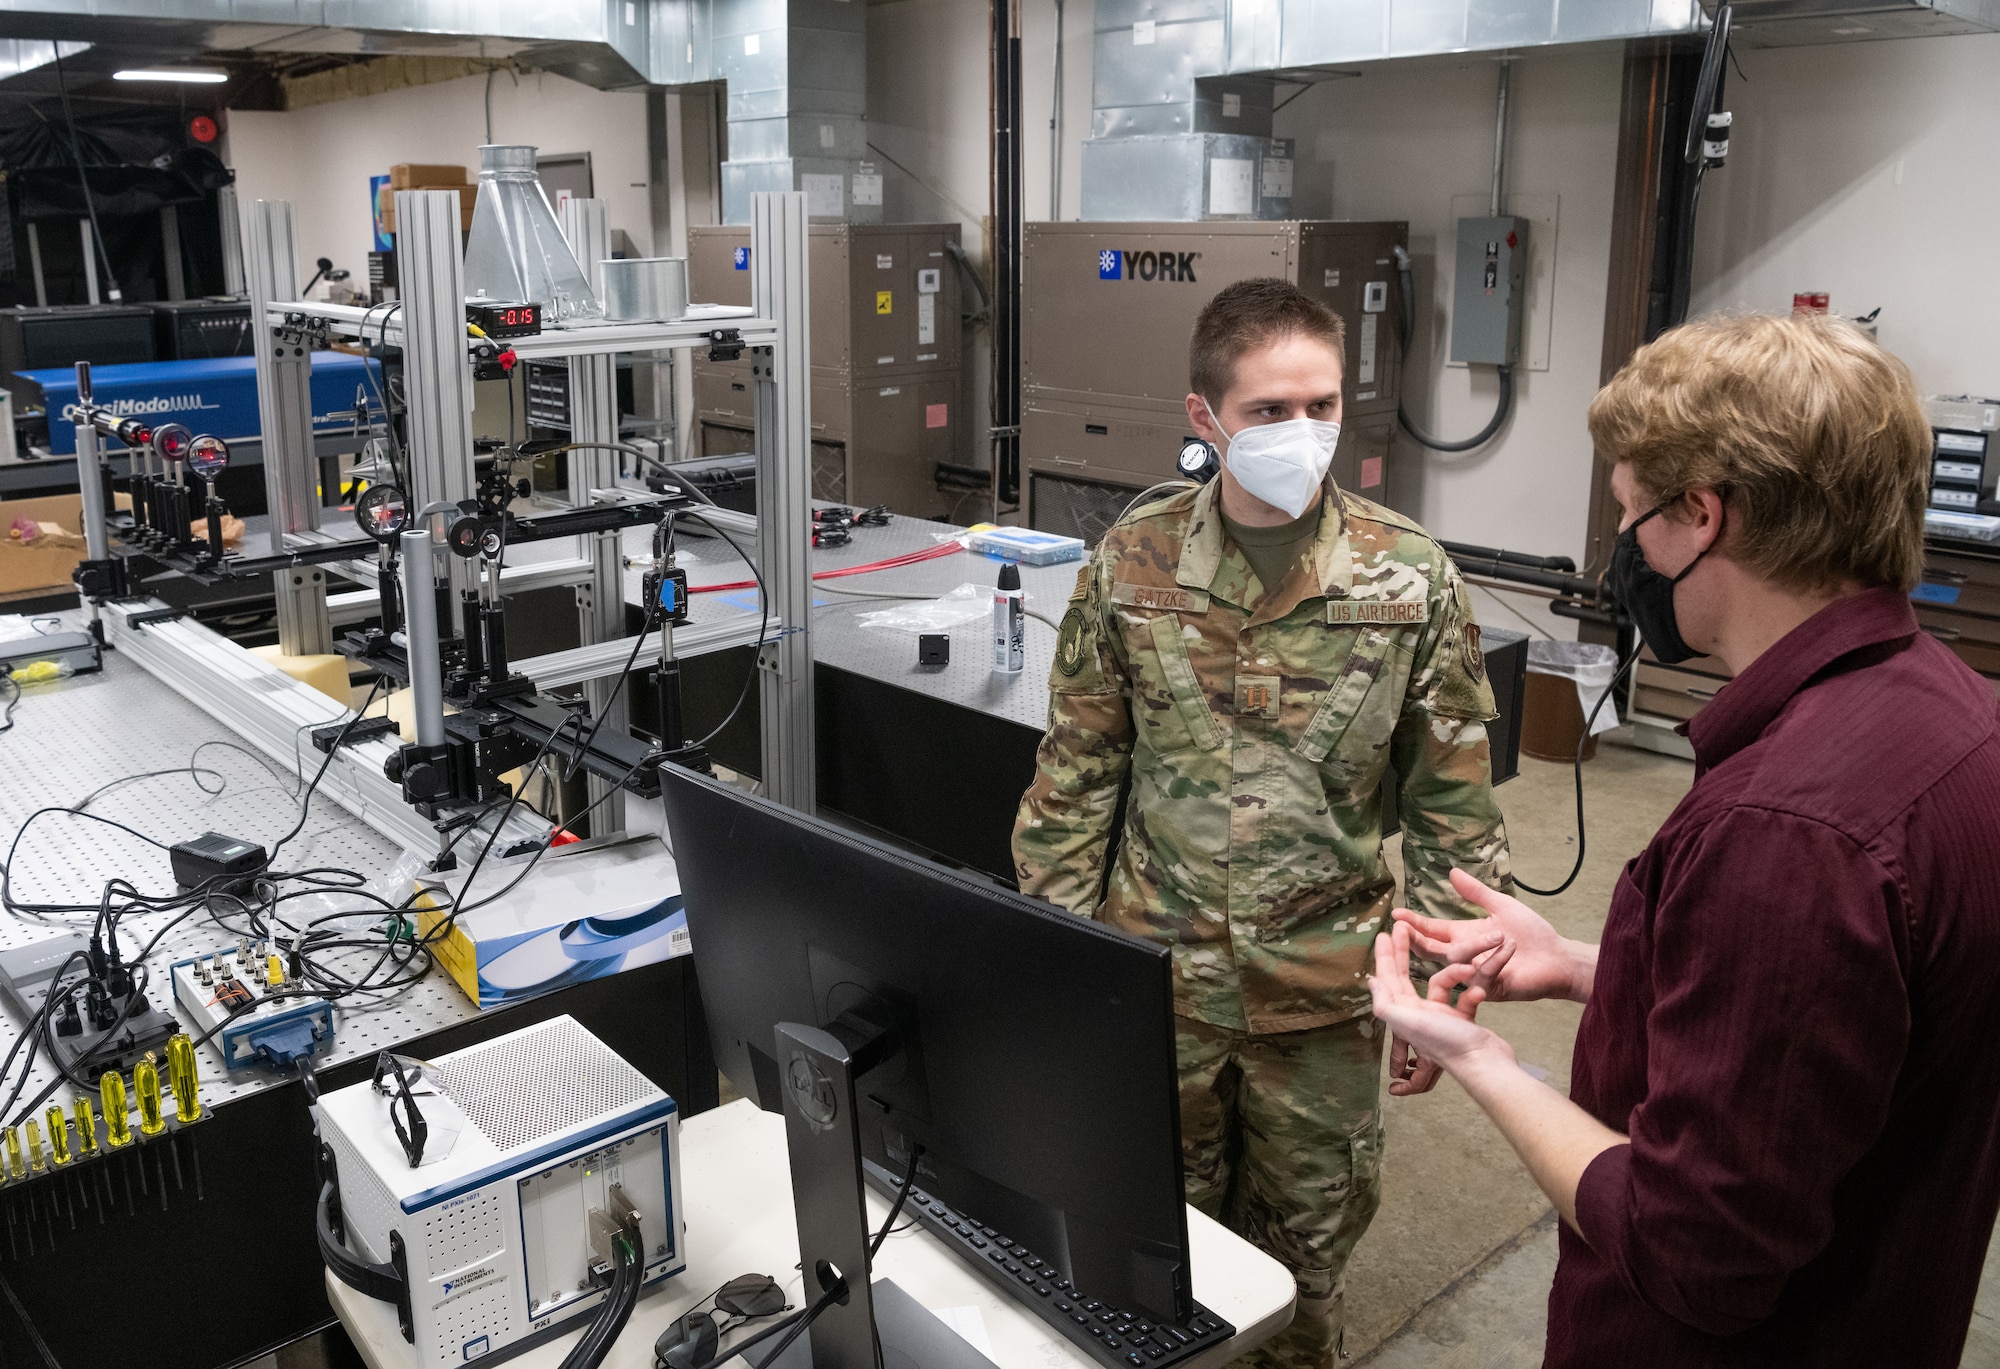 Test engineer Capt. Brian Gatzke with AEDC speaks with Theron Price, of UTSI, about the lab setup in front of them at the University of Tennessee Space Institute.